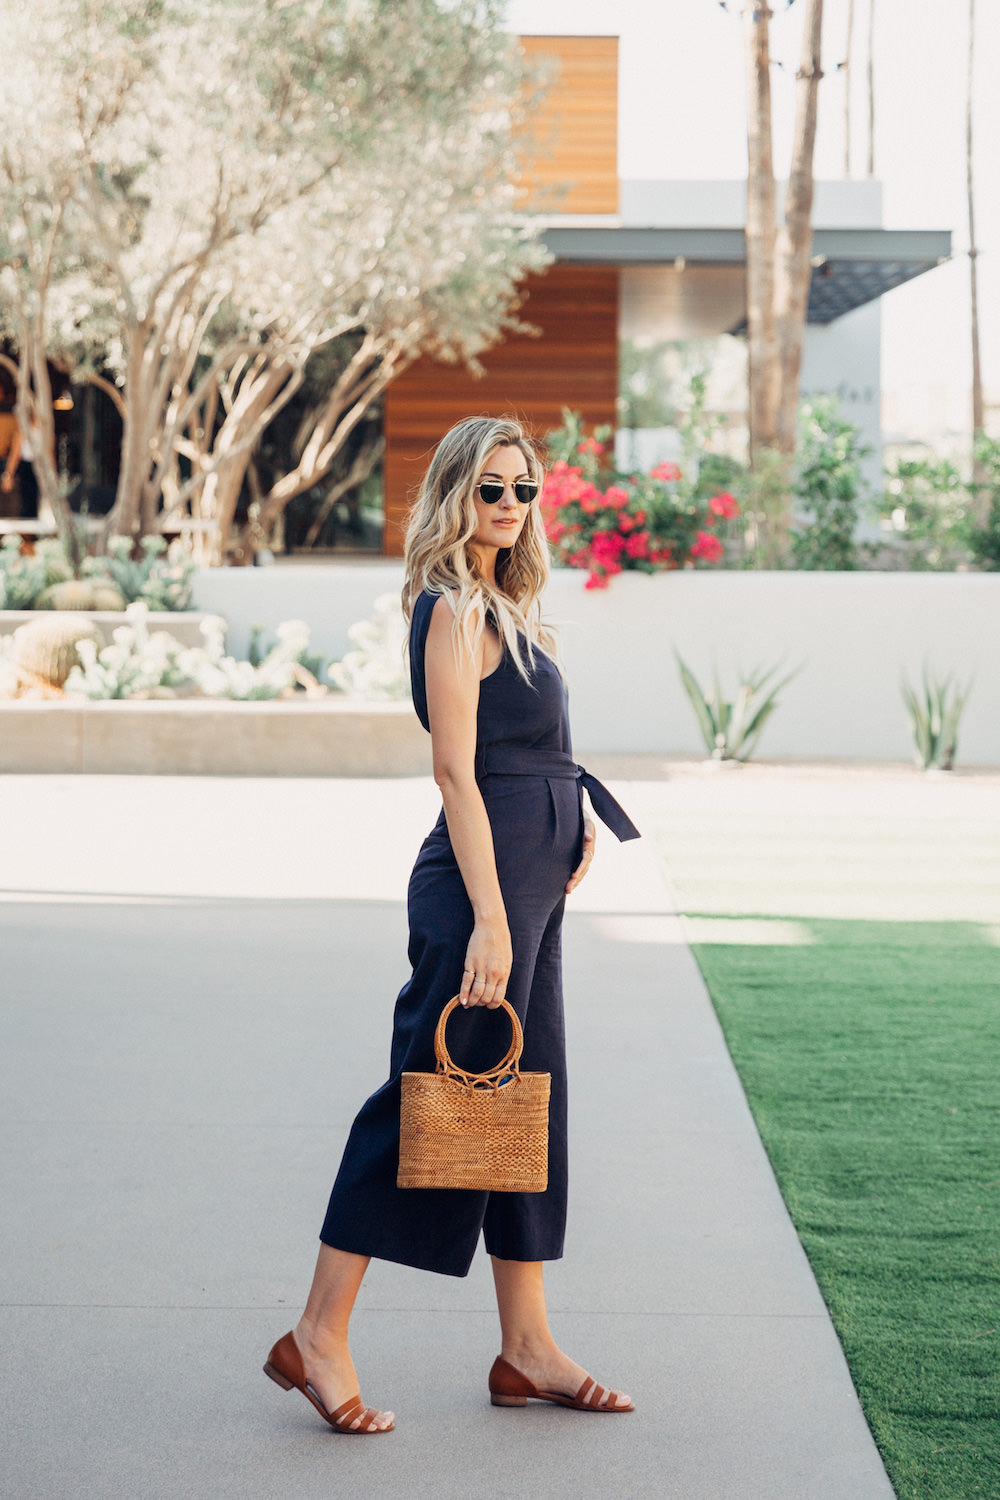 Arizona staycation at the Andaz Resort by Dash of Darling.